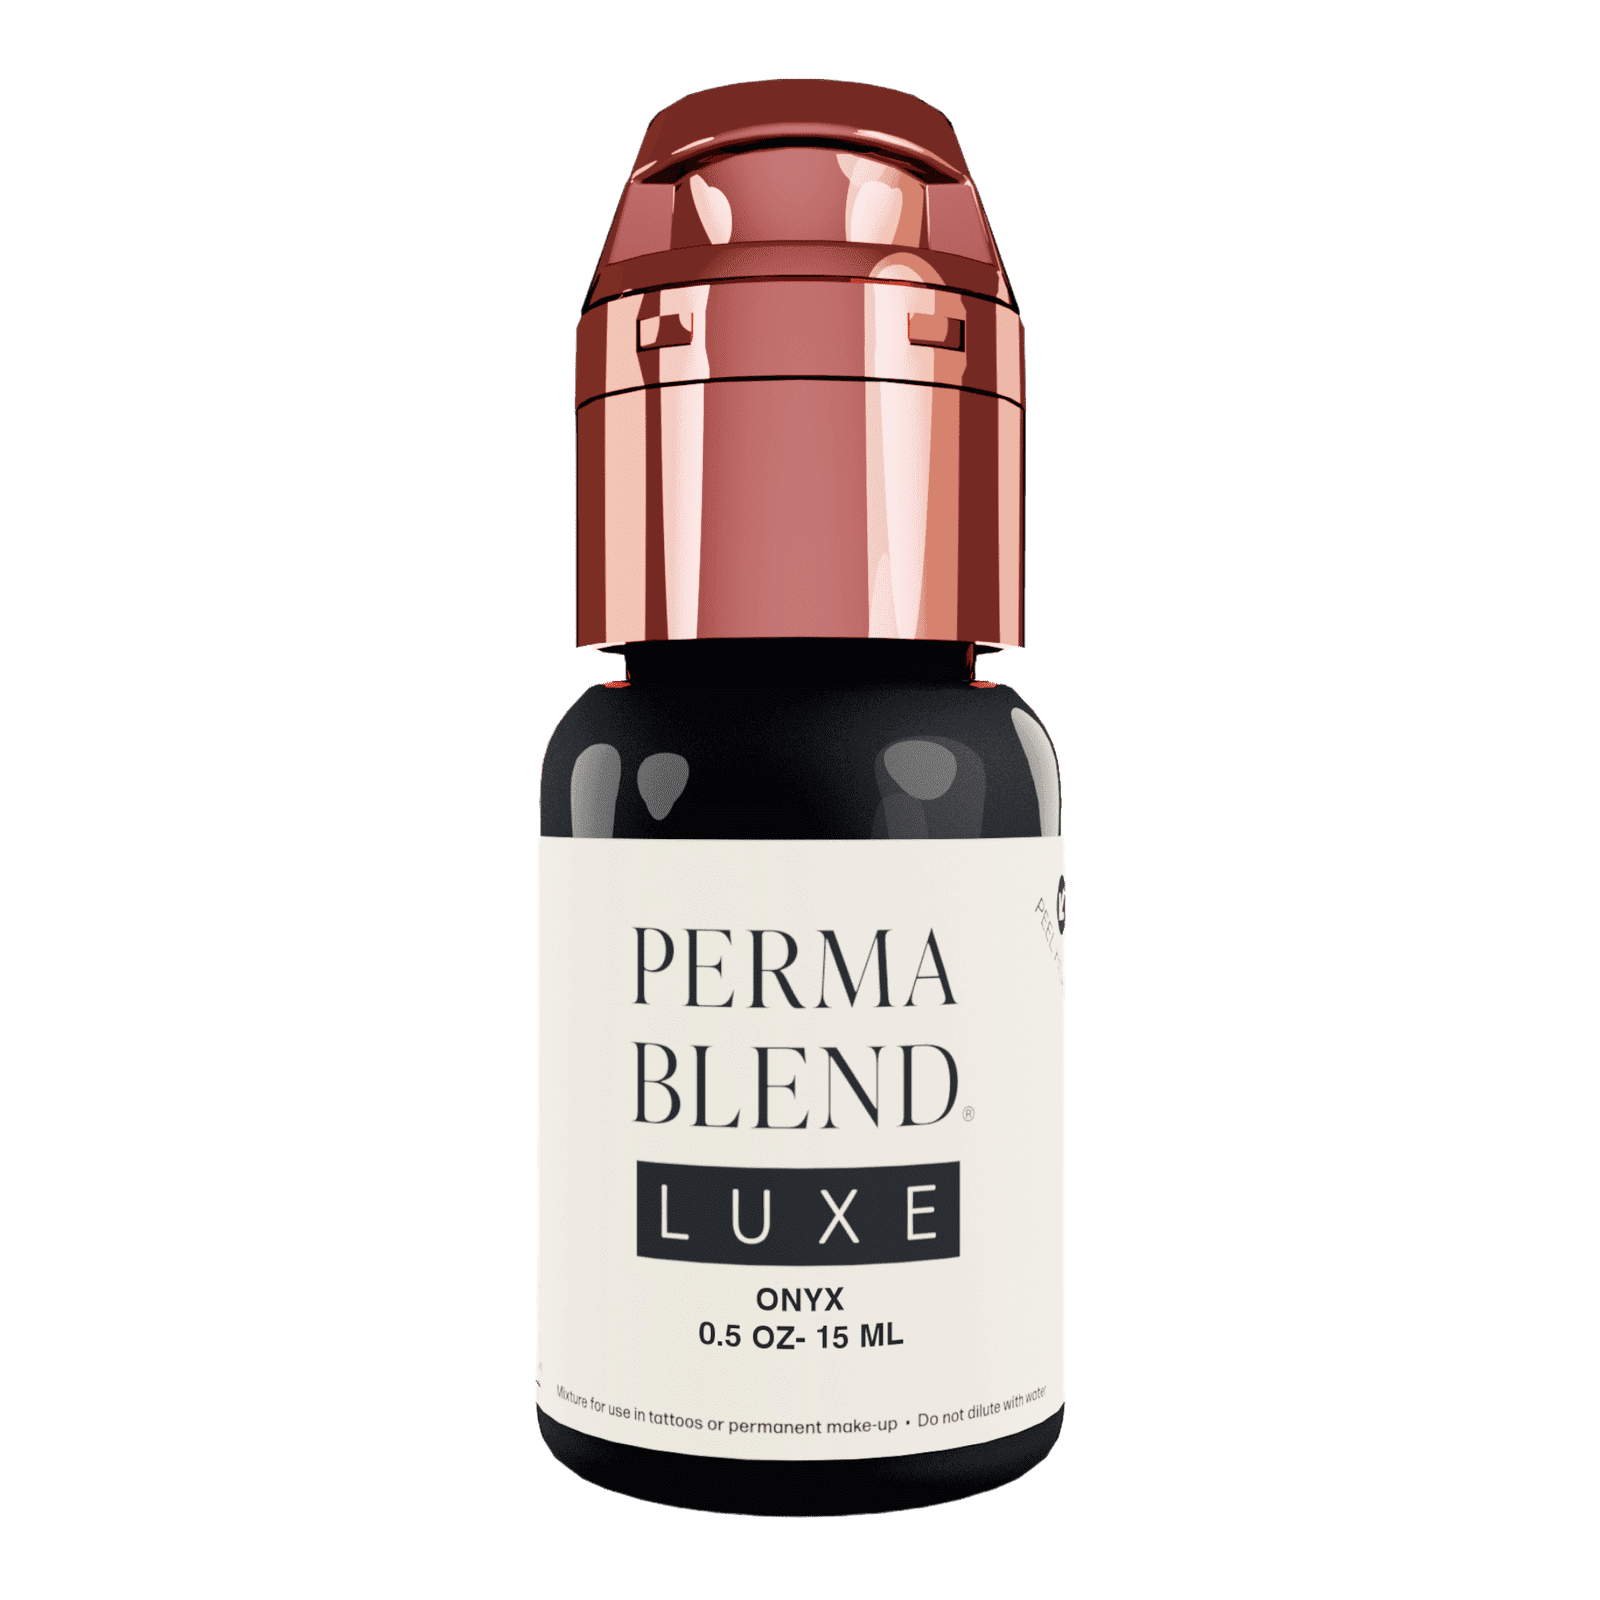 Perma Blend Luxe Onyx